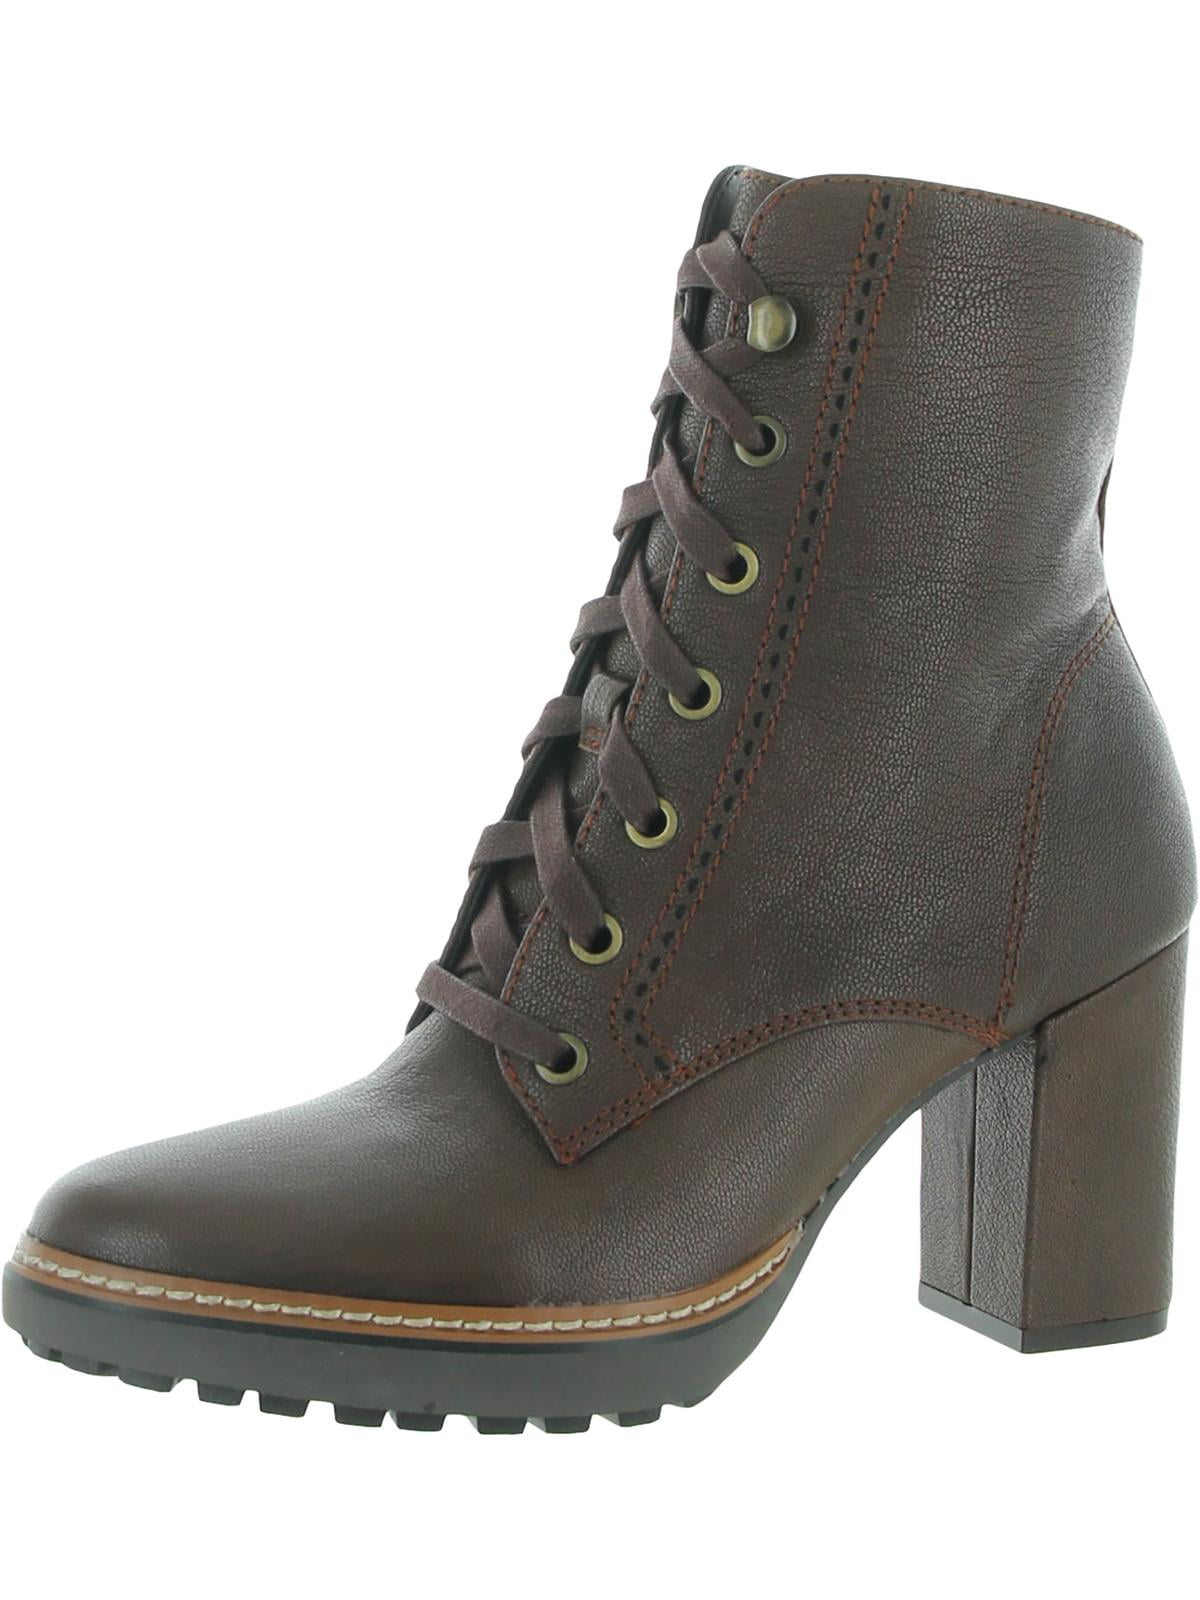 Naturalizer Womens Callie Combat Leather Ankle Boots Brown 9.5 Medium ...